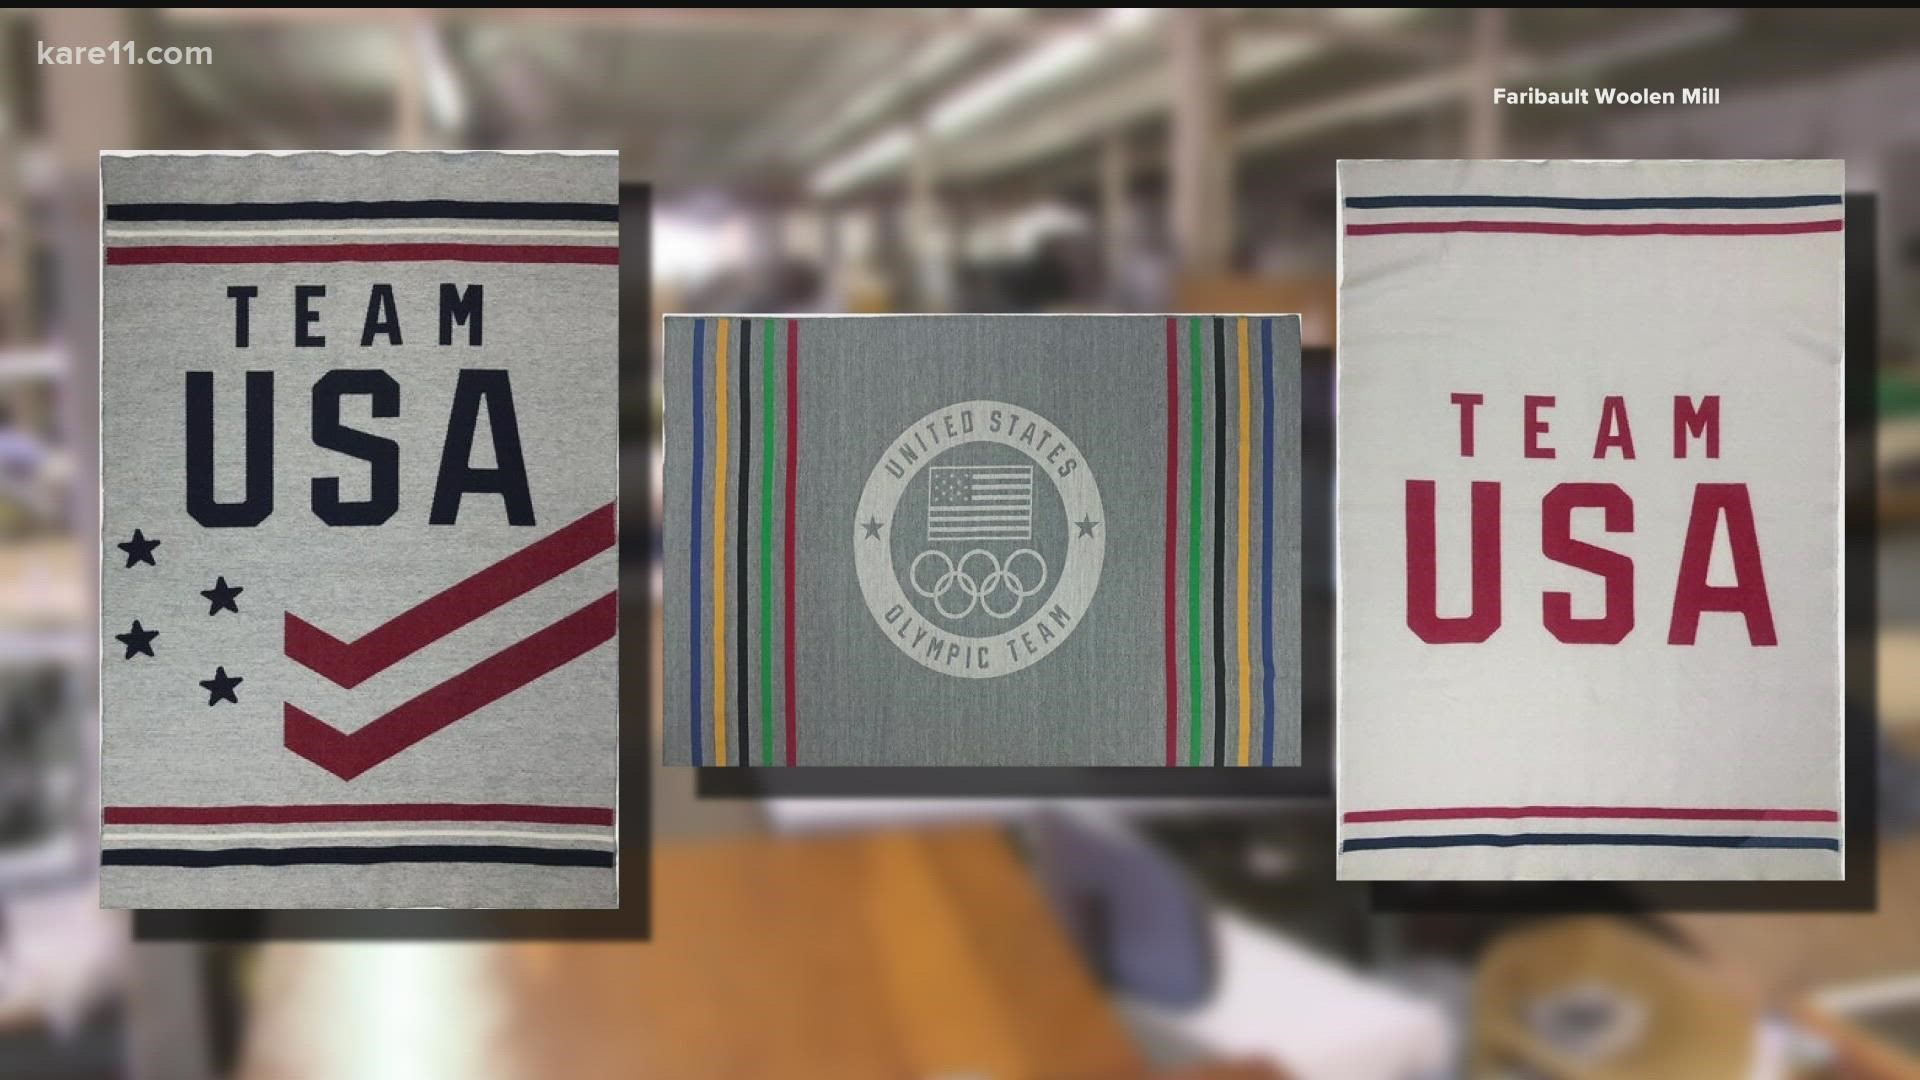 Fairbault Woolen Mill is partnering with the U.S. Olympic Committee to create a new line up of Team USA blankets that are made in Minnesota.